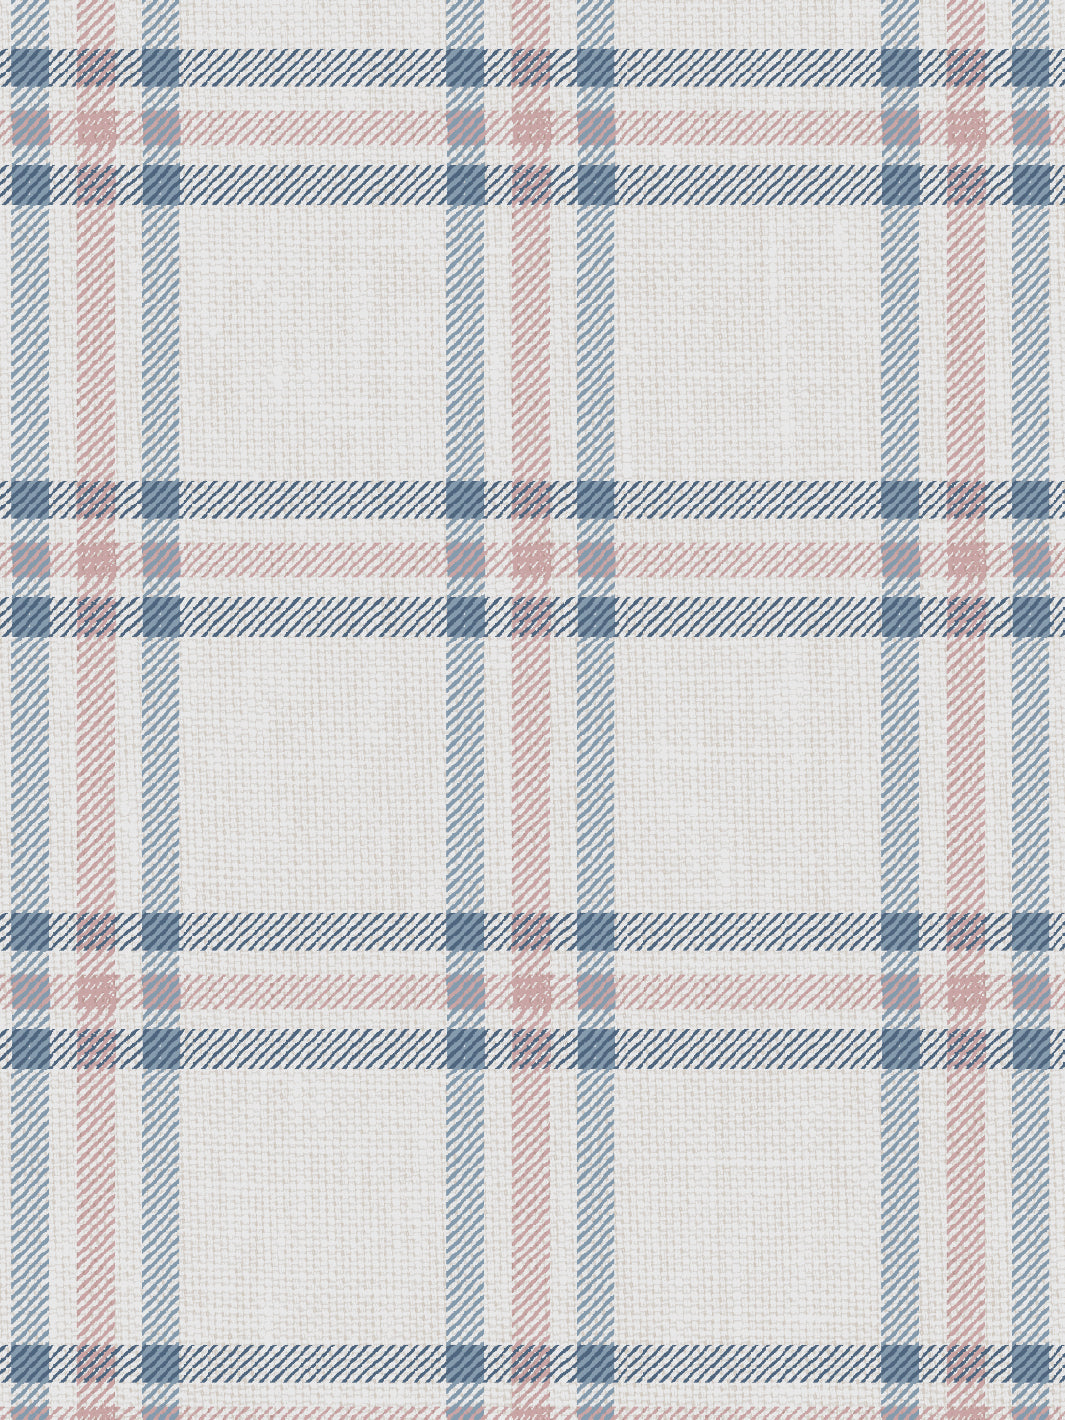 'Rogers Plaid' Wallpaper by Nathan Turner - Blue Pink